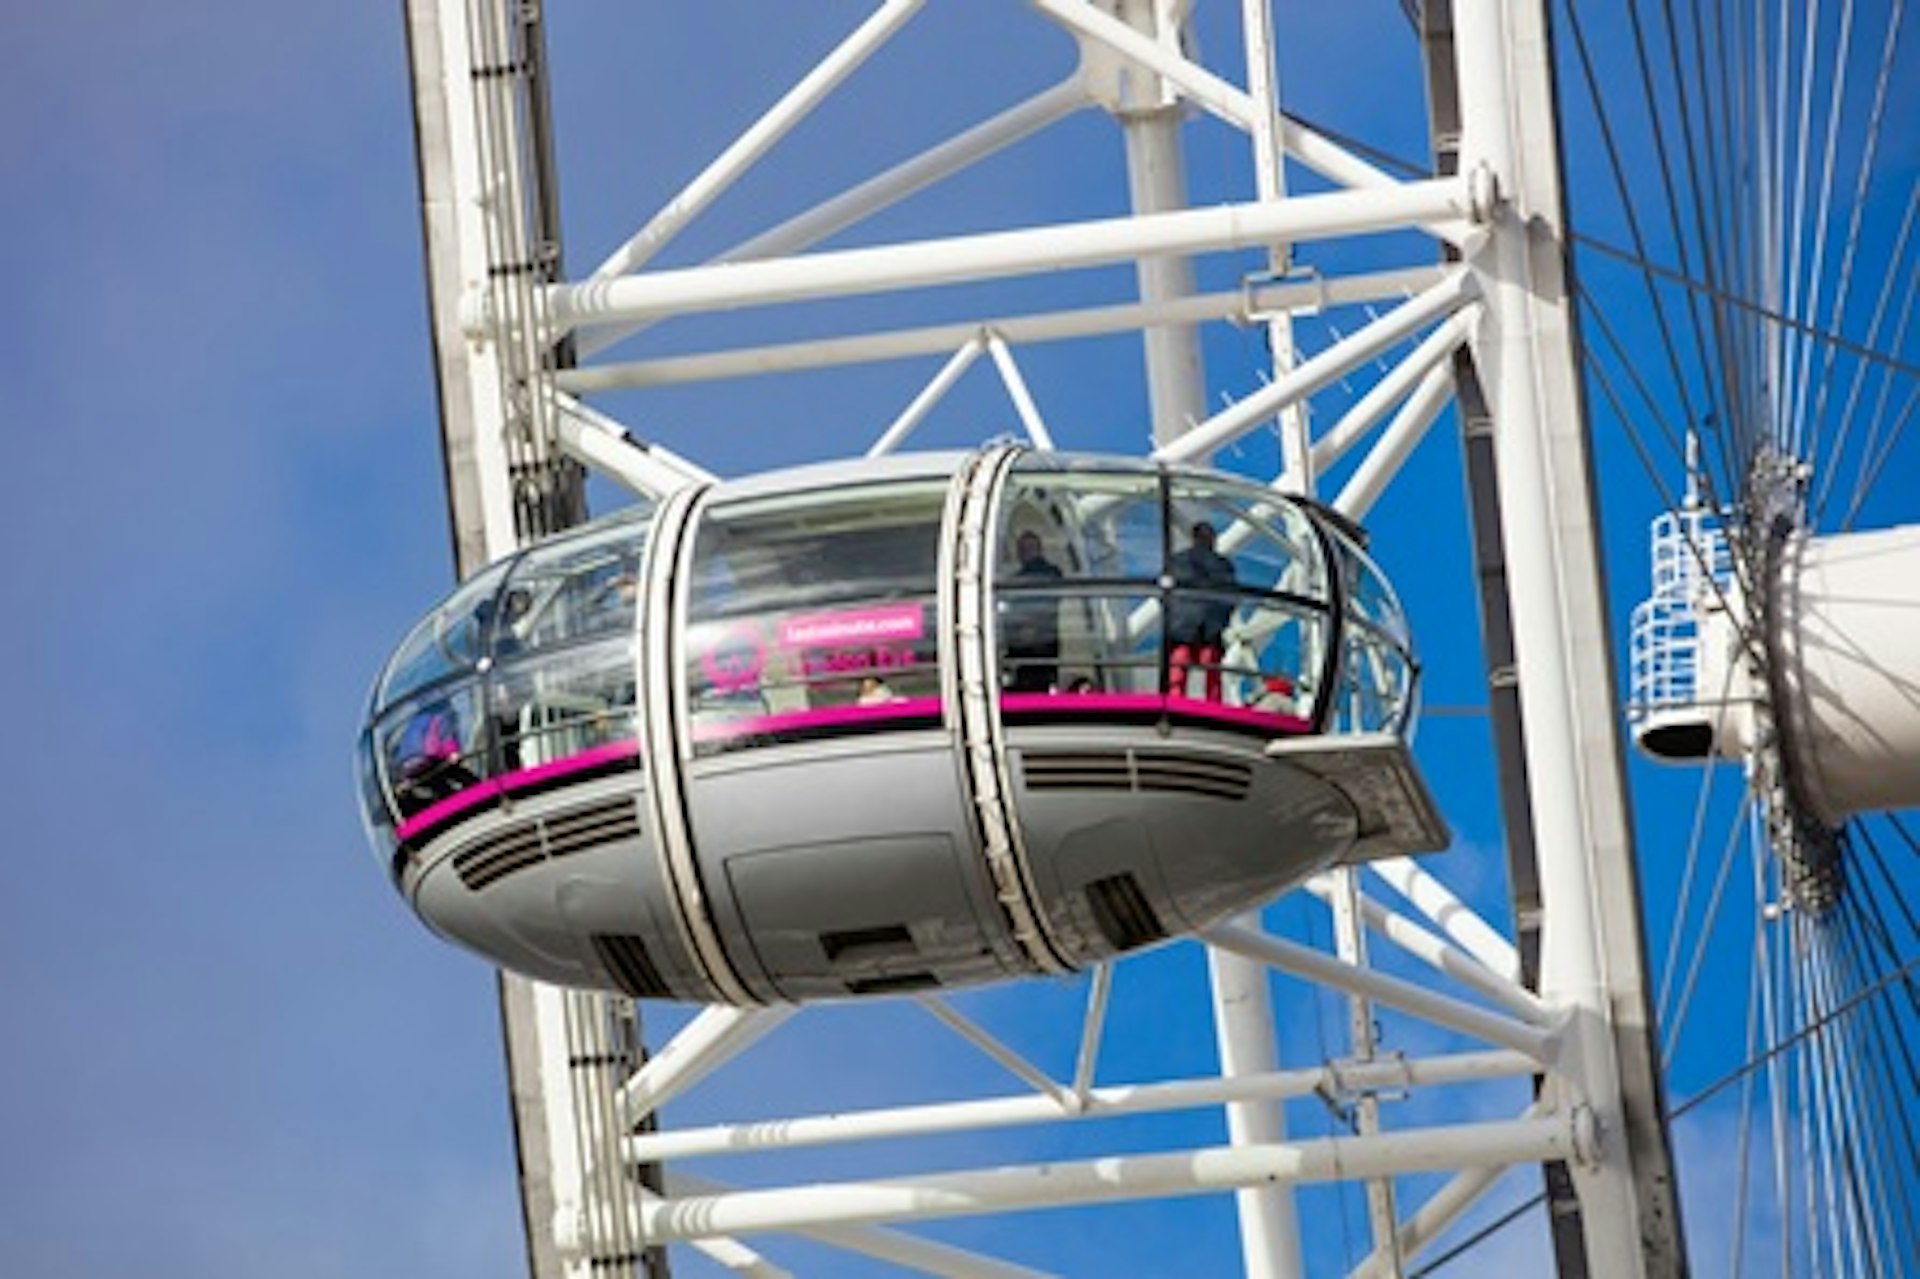 Visit to Lastminute.com London Eye with London Eye River Cruise - Two Adults and Two Children 1